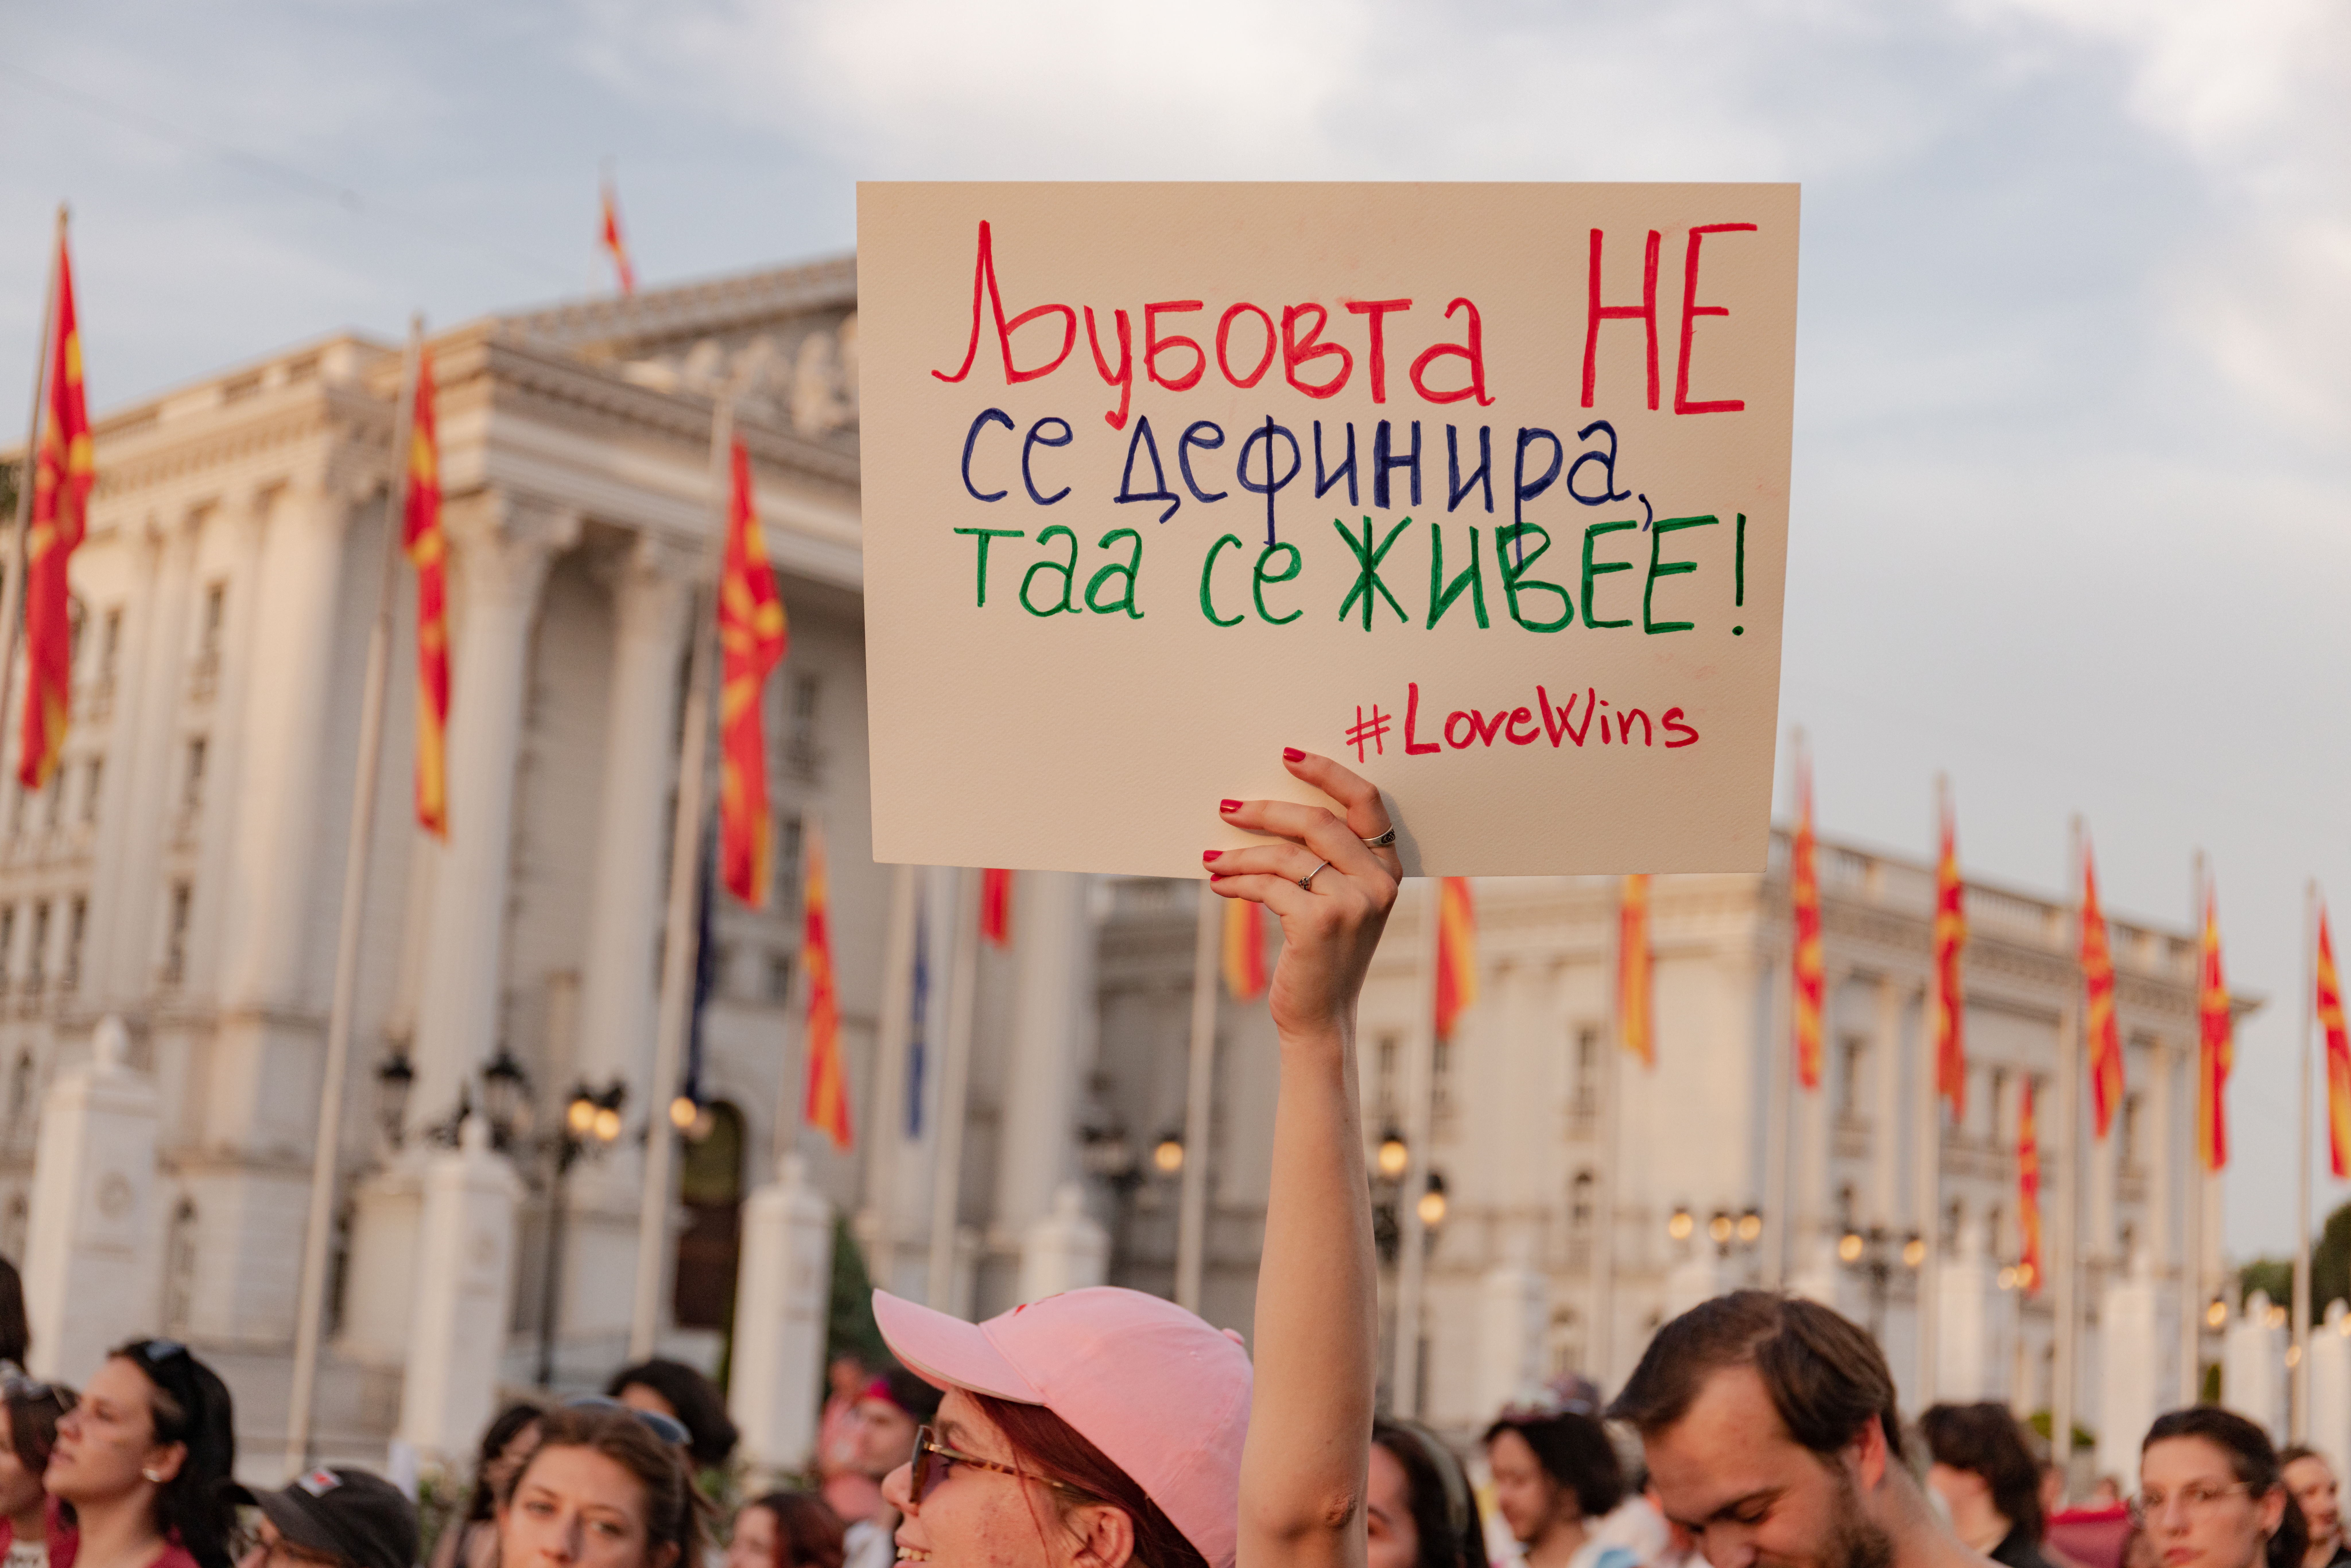 Love wins at this year’s Skopje Pride!